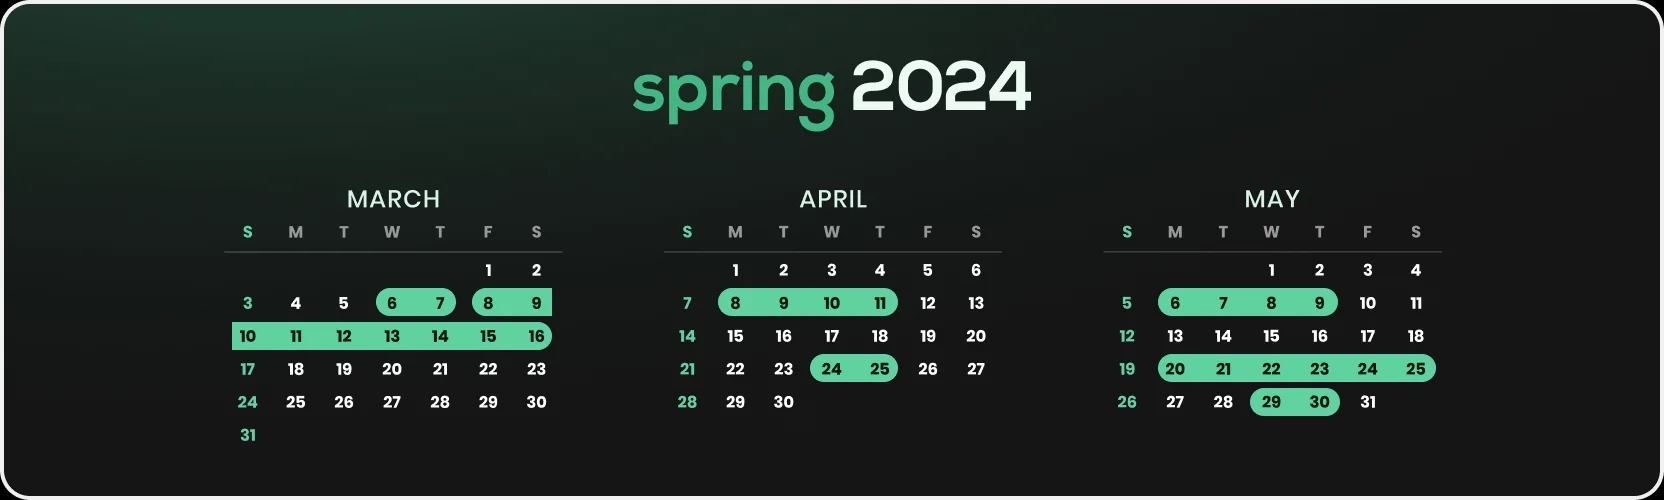 Top 10 Tech Events Guide for Spring 2024